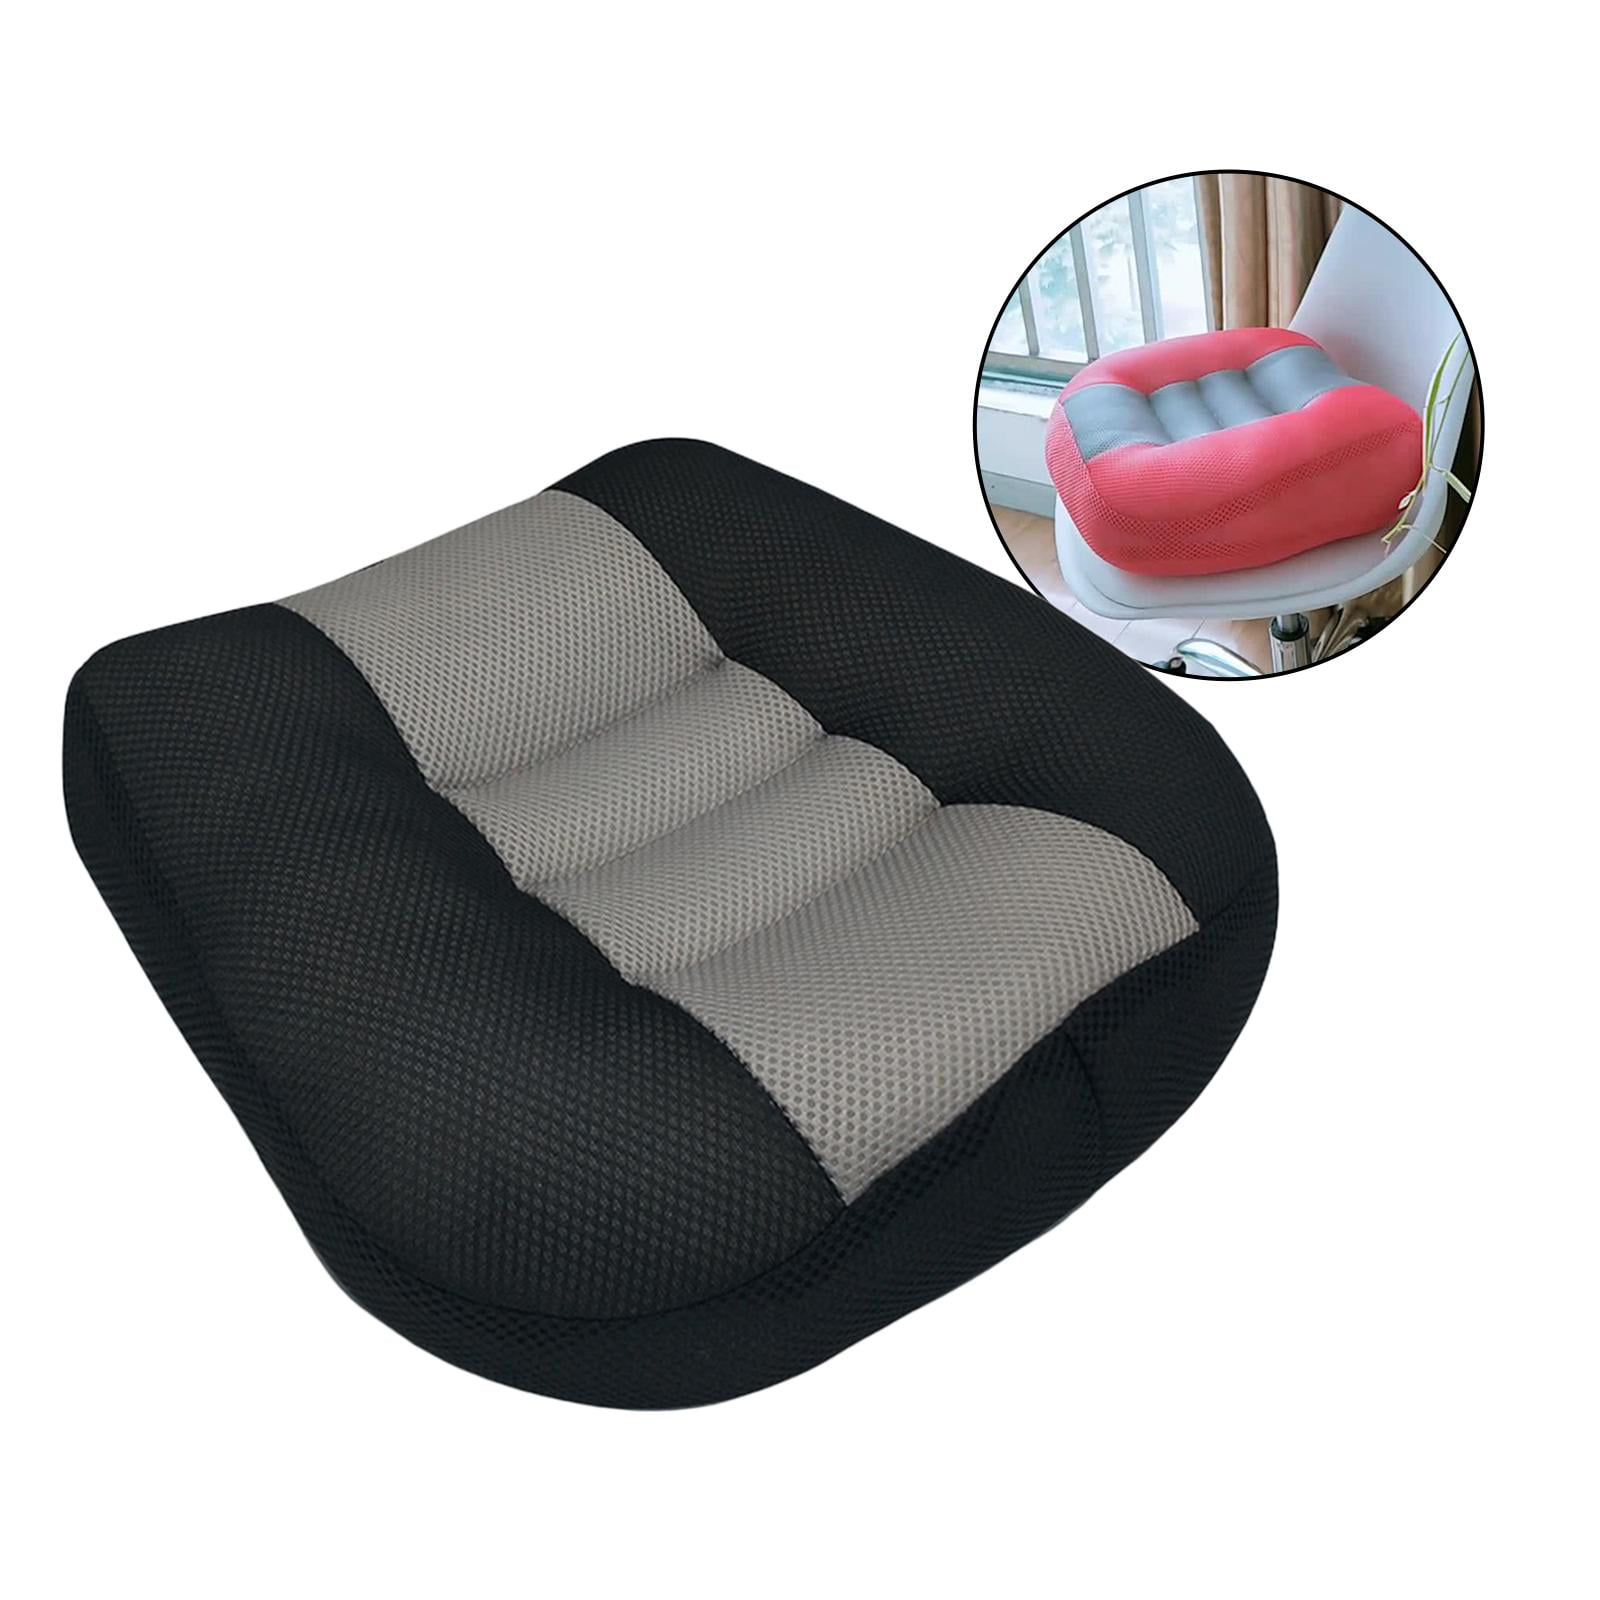 Car Booster Seat Cushion Memory Foam Height Seat Protector Cover Pad Mats  Adult Car Seat Booster Cushions For Short People